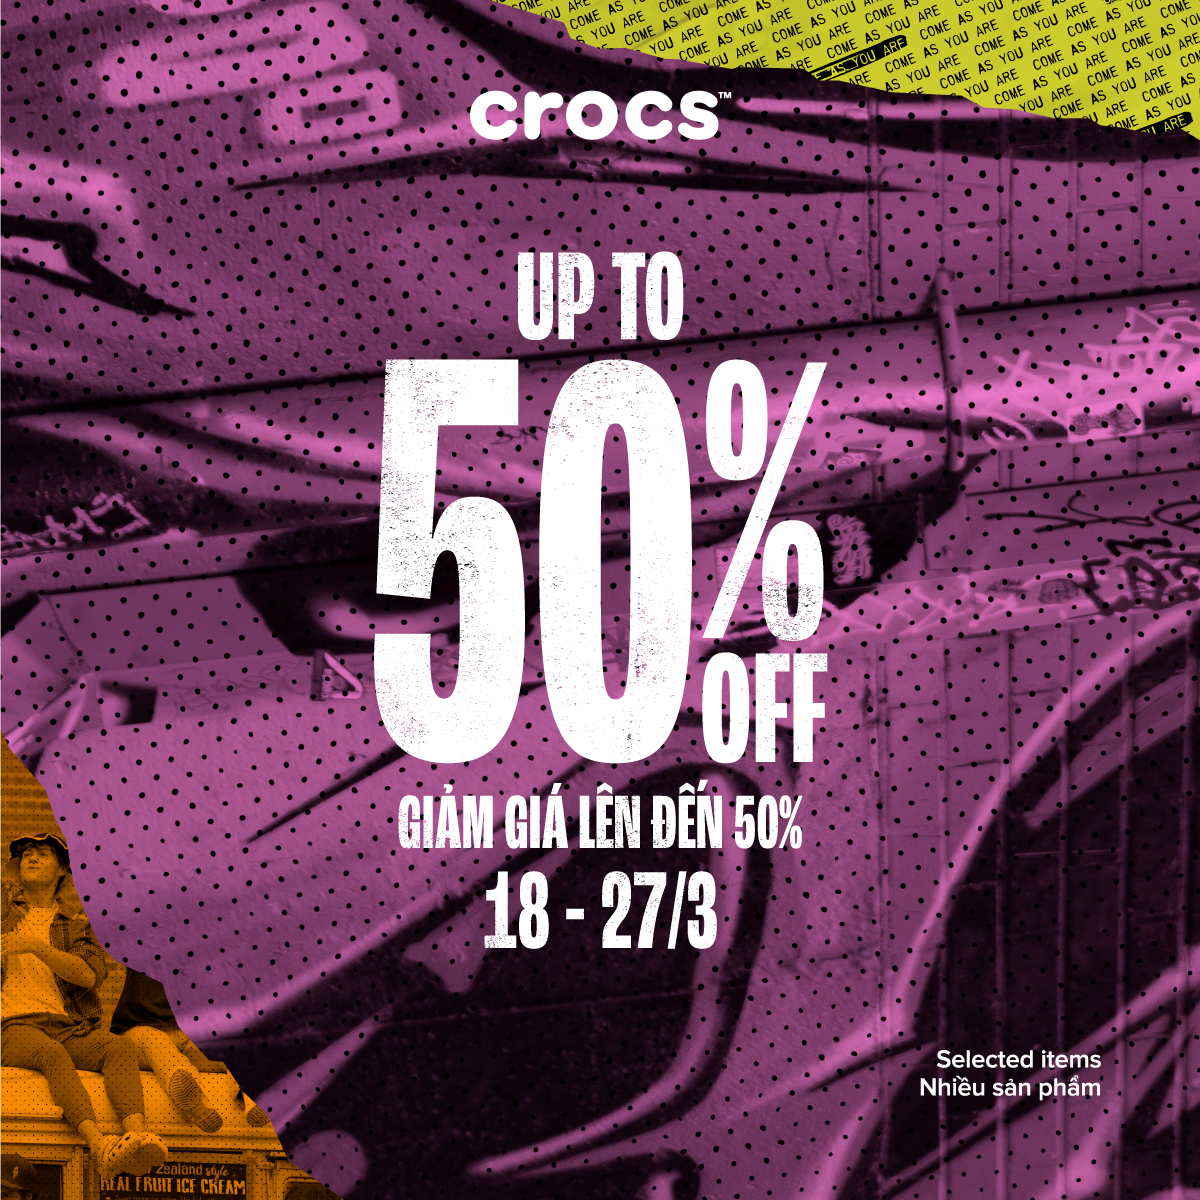 MID SEASON SALE - ENJOY SPECIAL OFFERS UP TO 50% OFF FROM CROCS